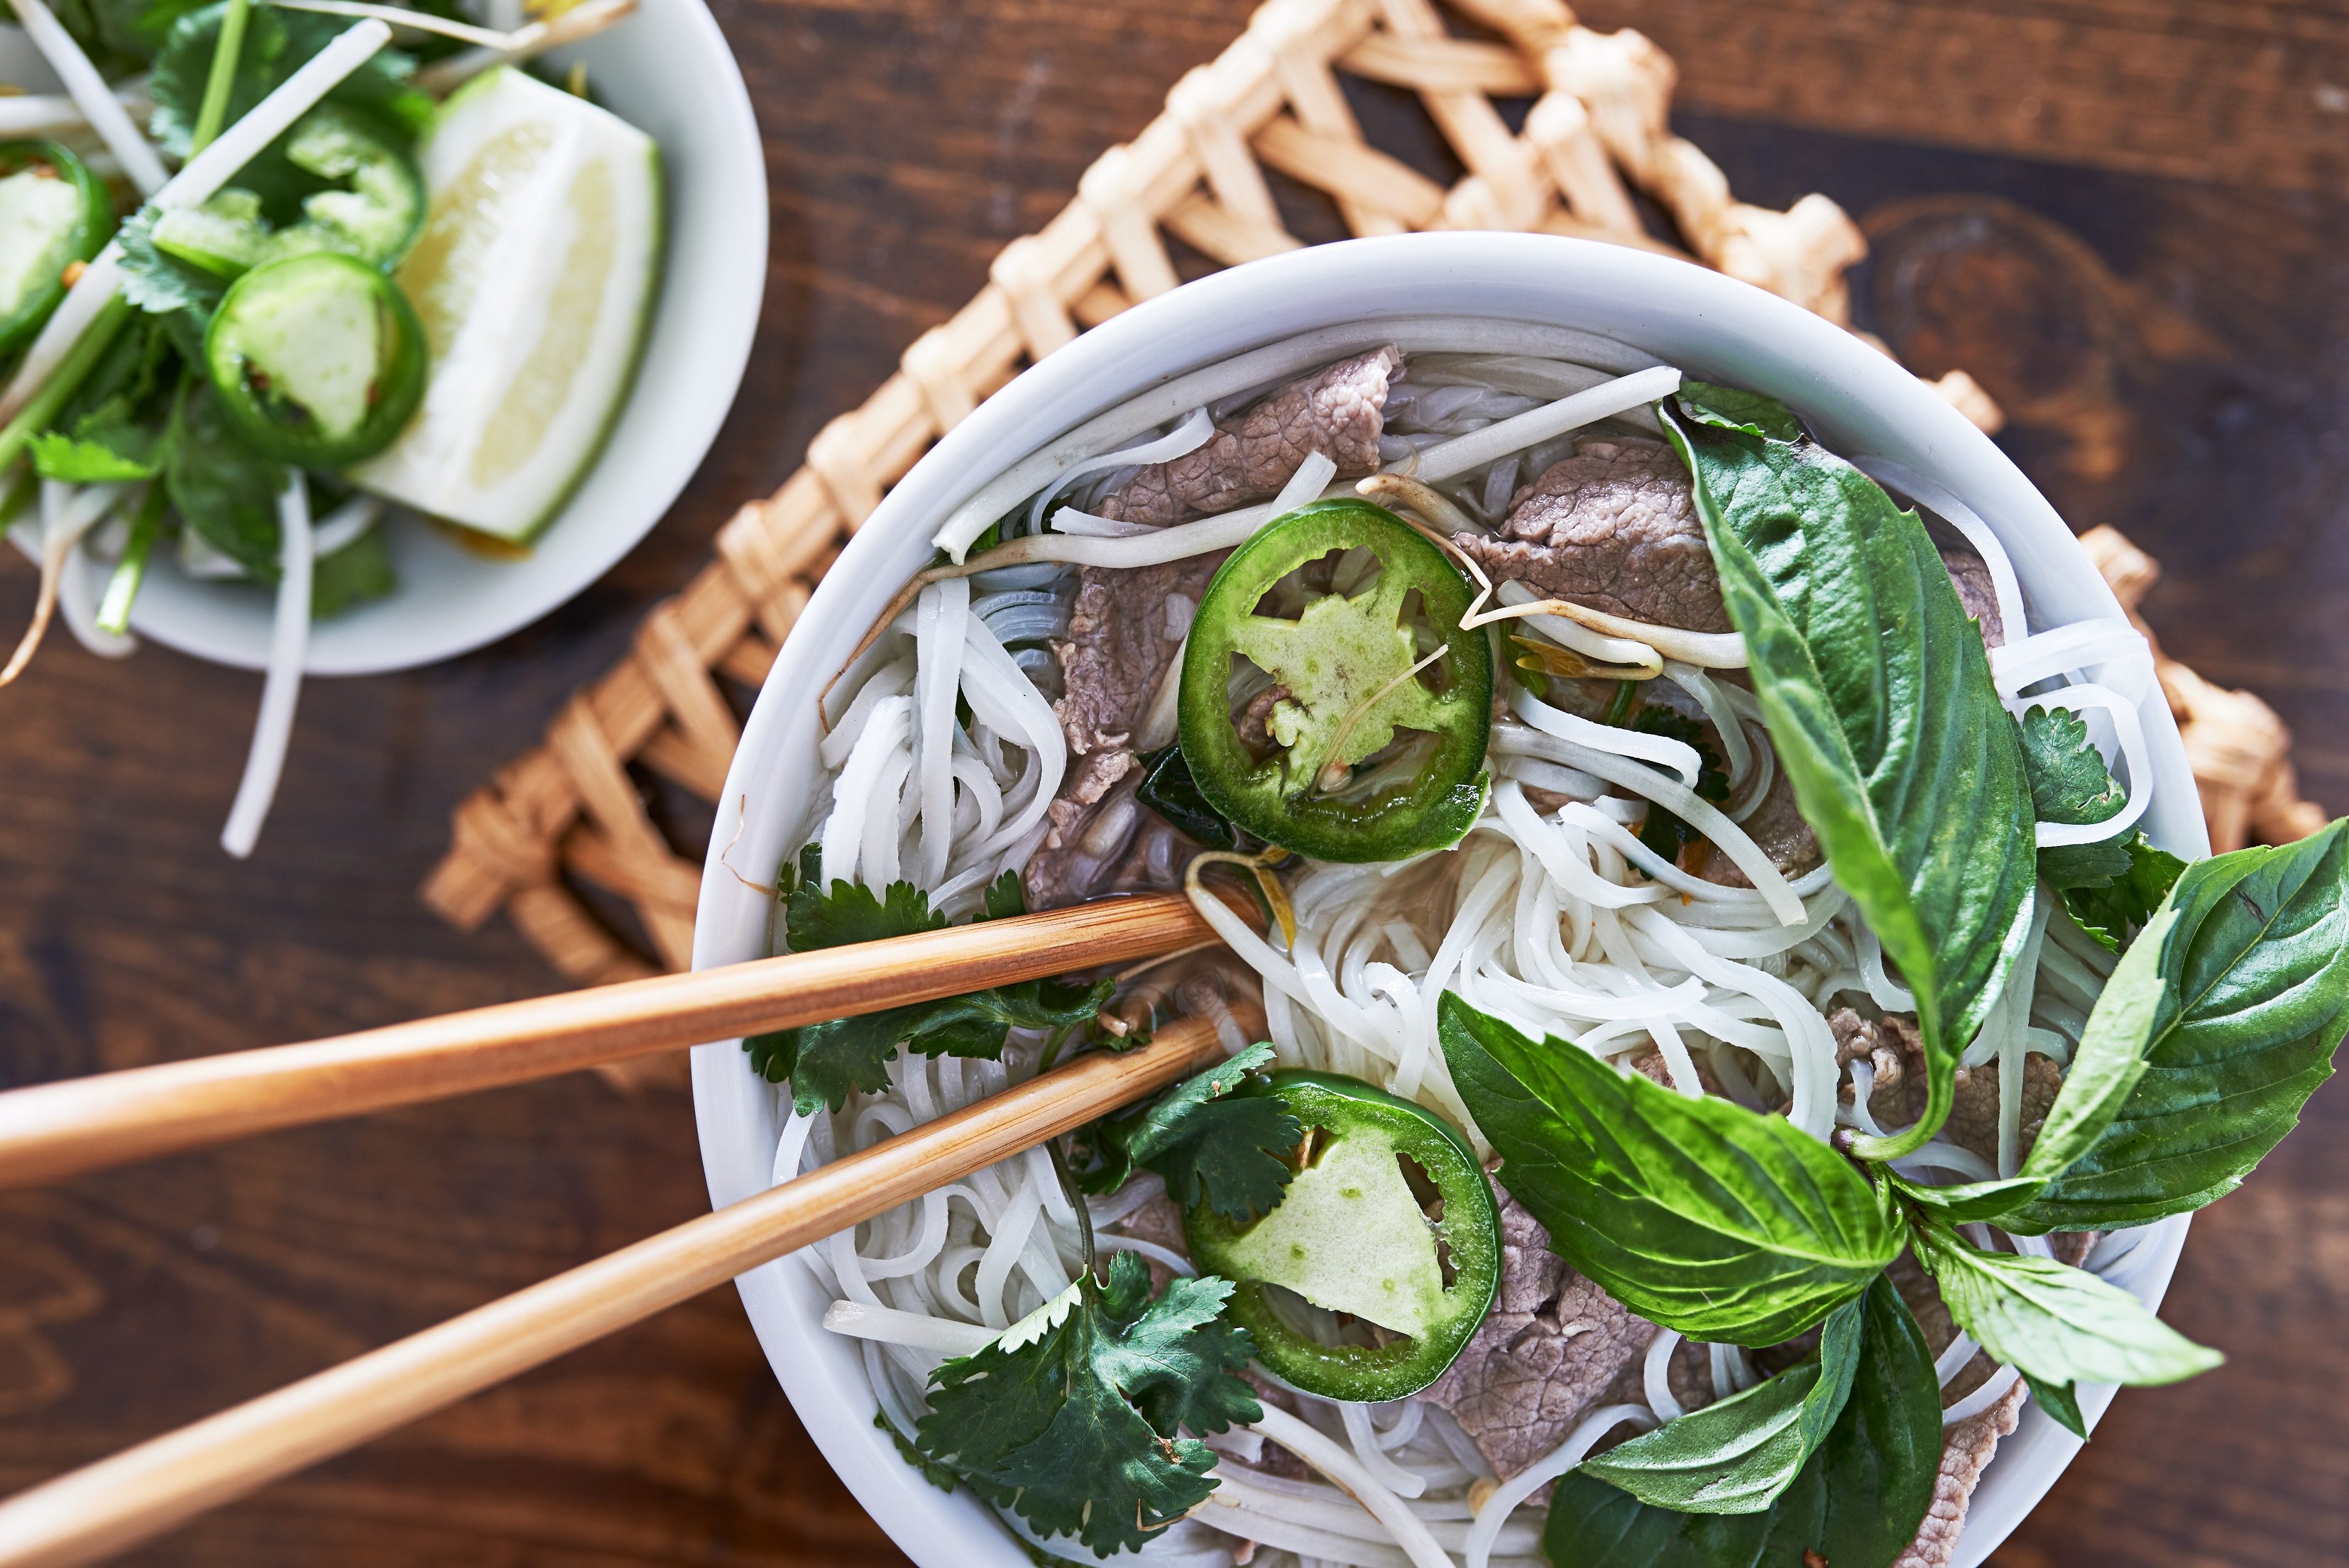 Mix up your boring lunch routine with a touch of Vietnamese flair.